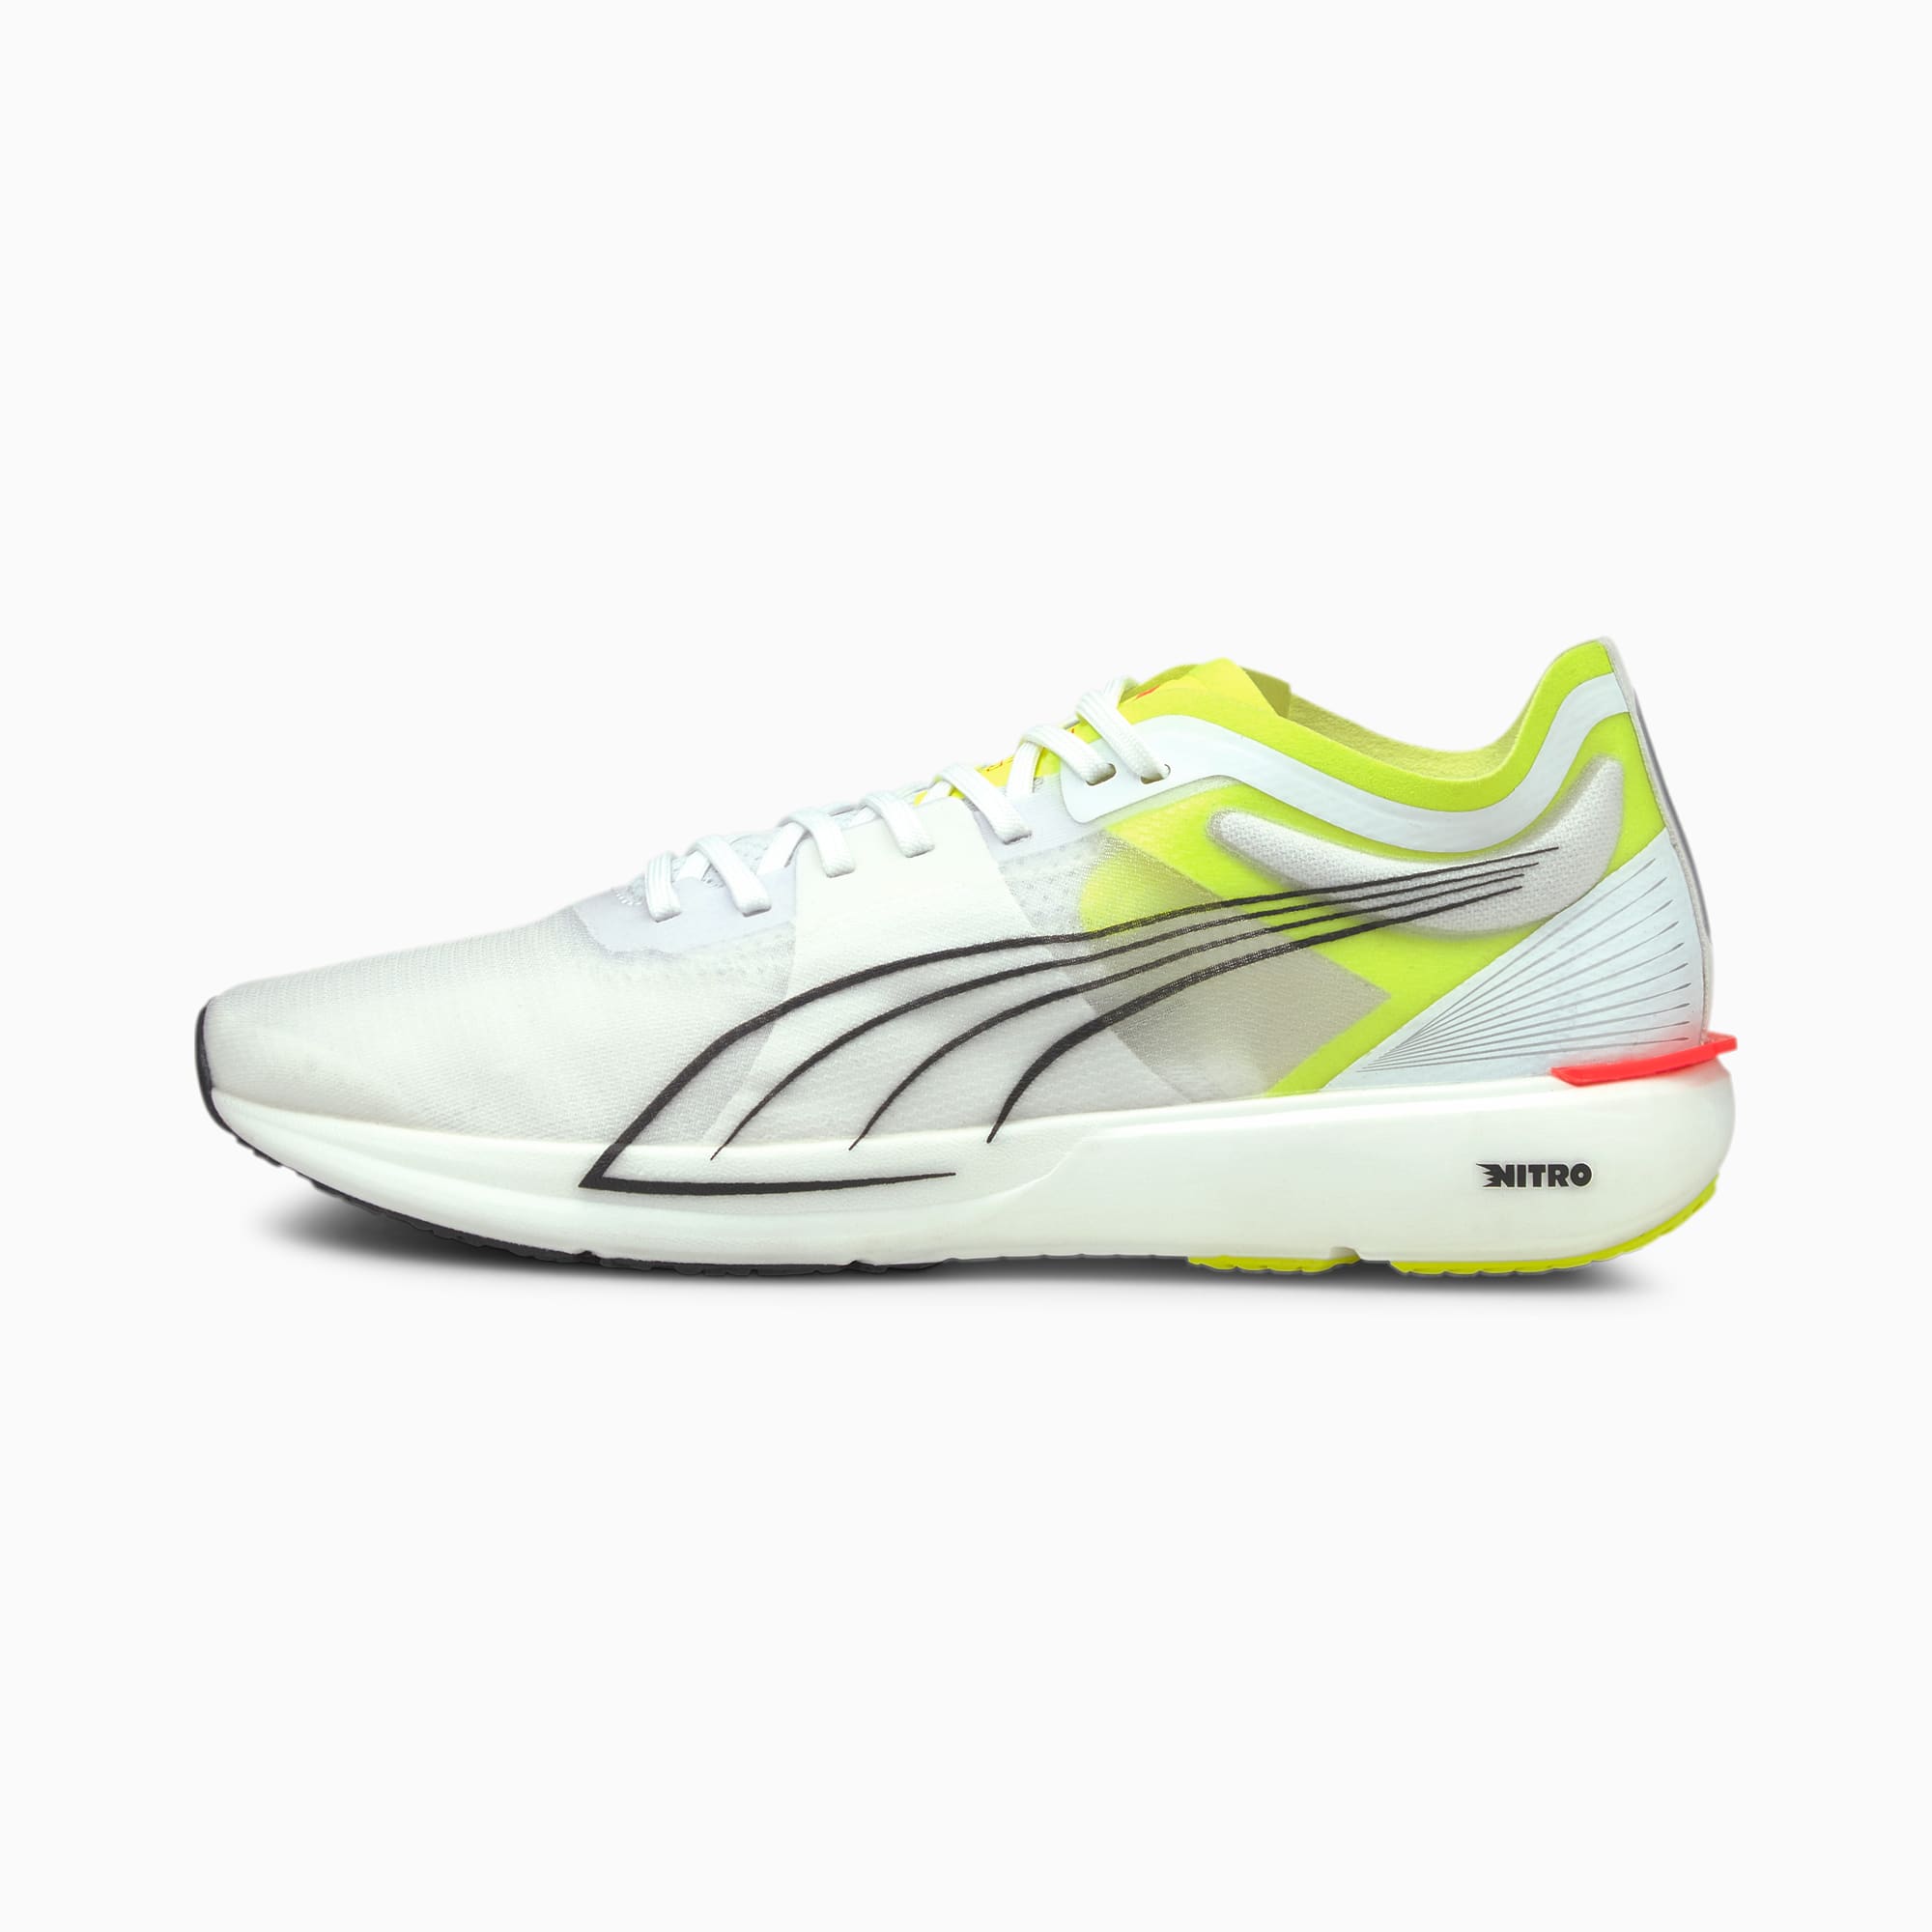 PUMA Chaussures de course Liberate Nitro homme, Blanc/Jaune, Taille 39, Chaussures